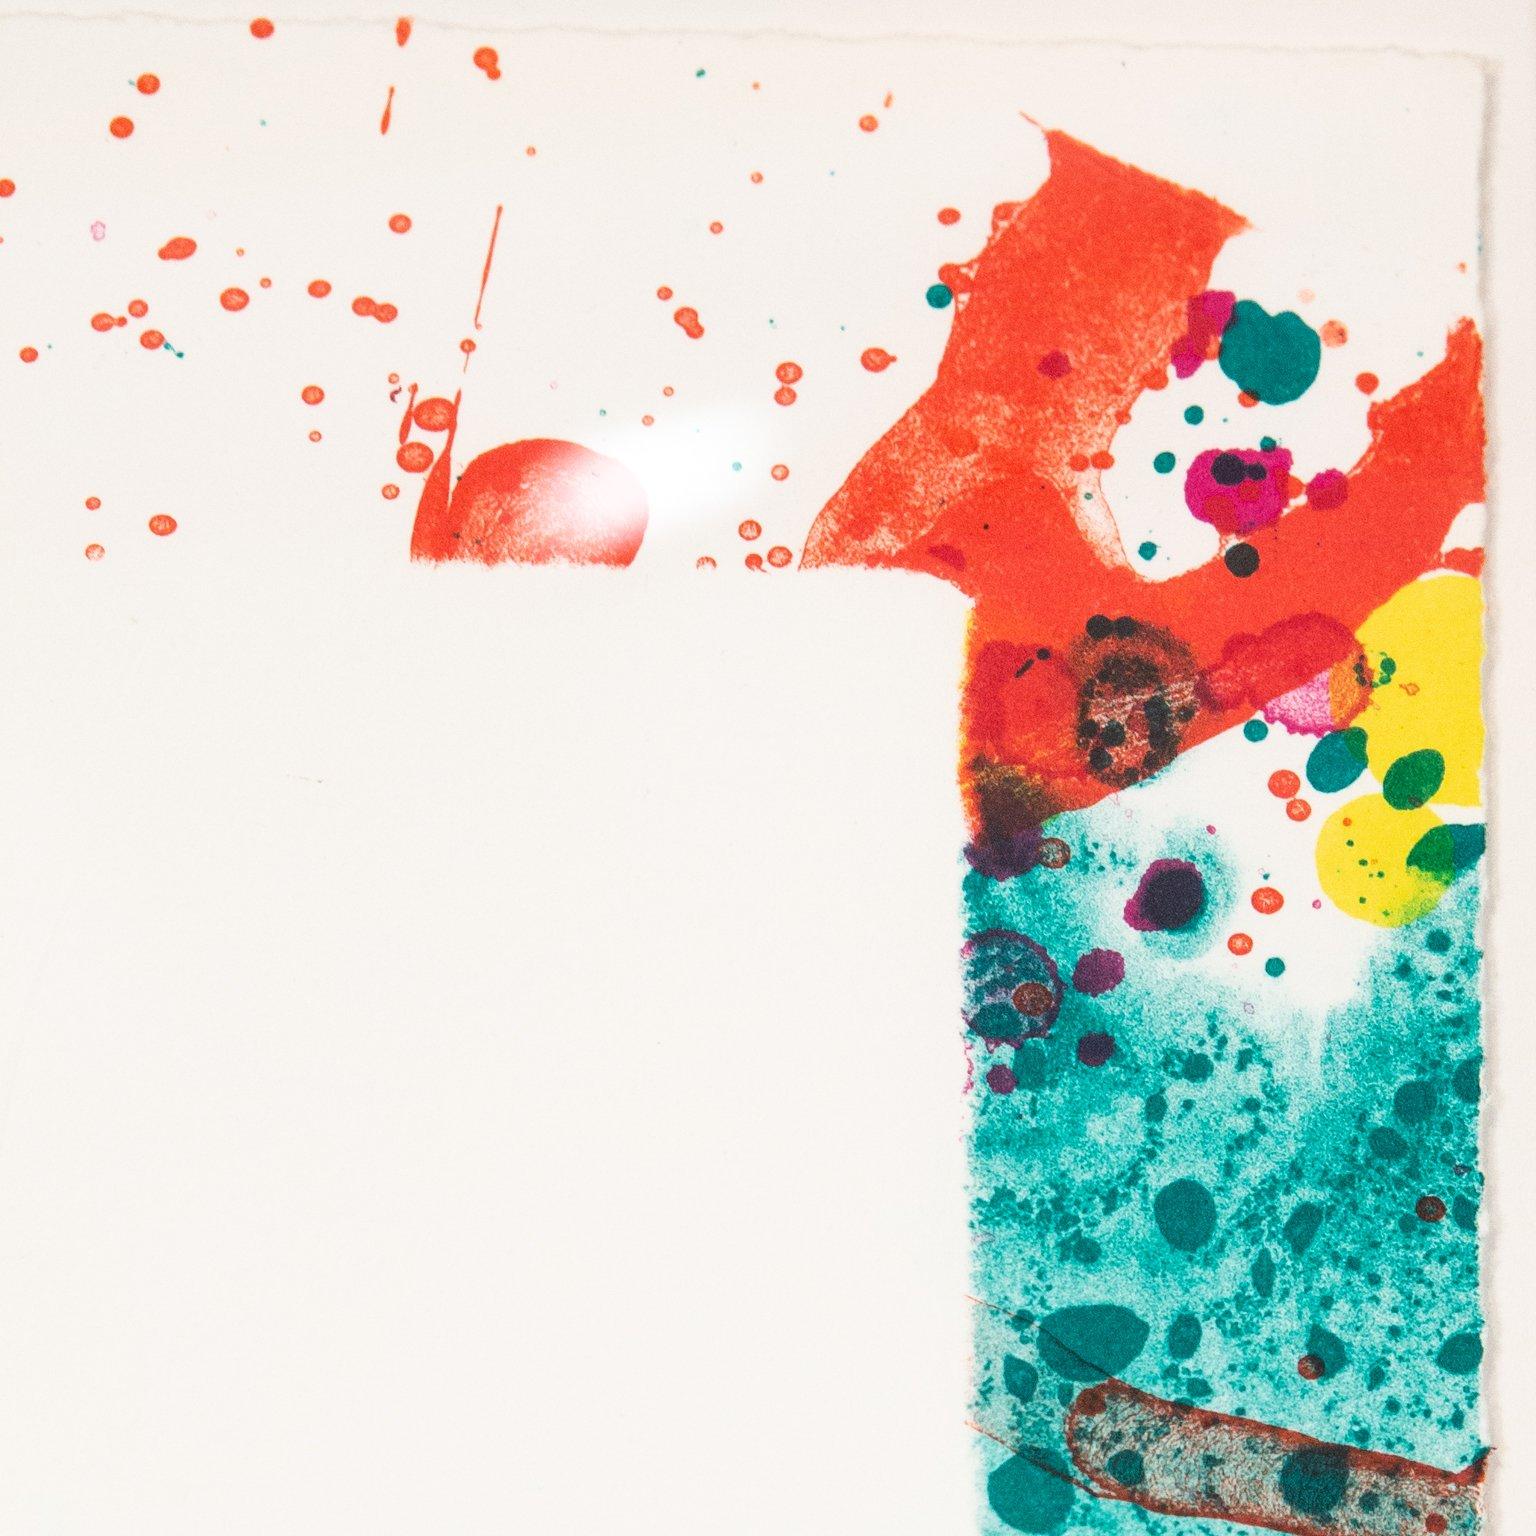 A preeminent figure in 20th century abstraction, Sam Francis (1923-1994) is renowned for his dynamic and colorful works.

Printmaking was an essential part of Francis' practice. The artist became so transfixed by the potential of the medium that he